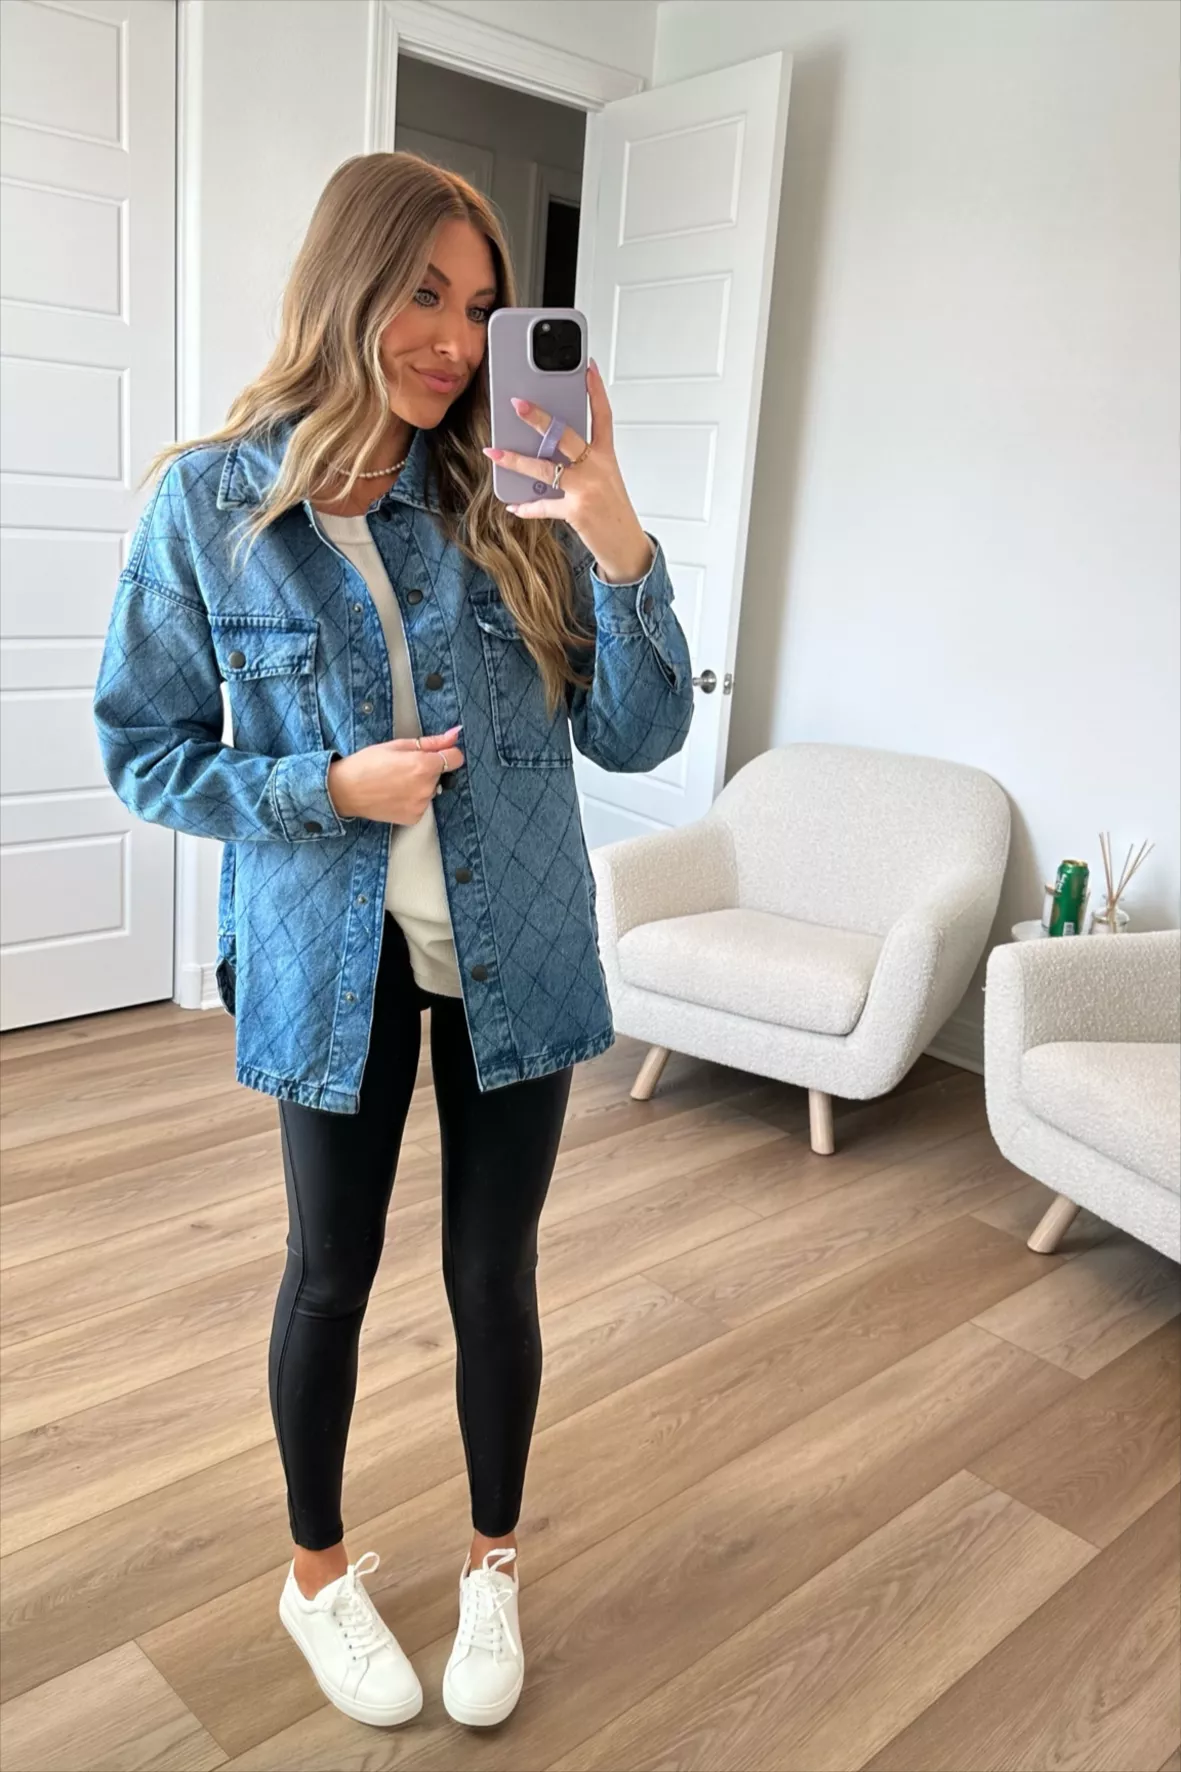 How To Wear Leather Leggings With Denim Jacket - Pin Picture